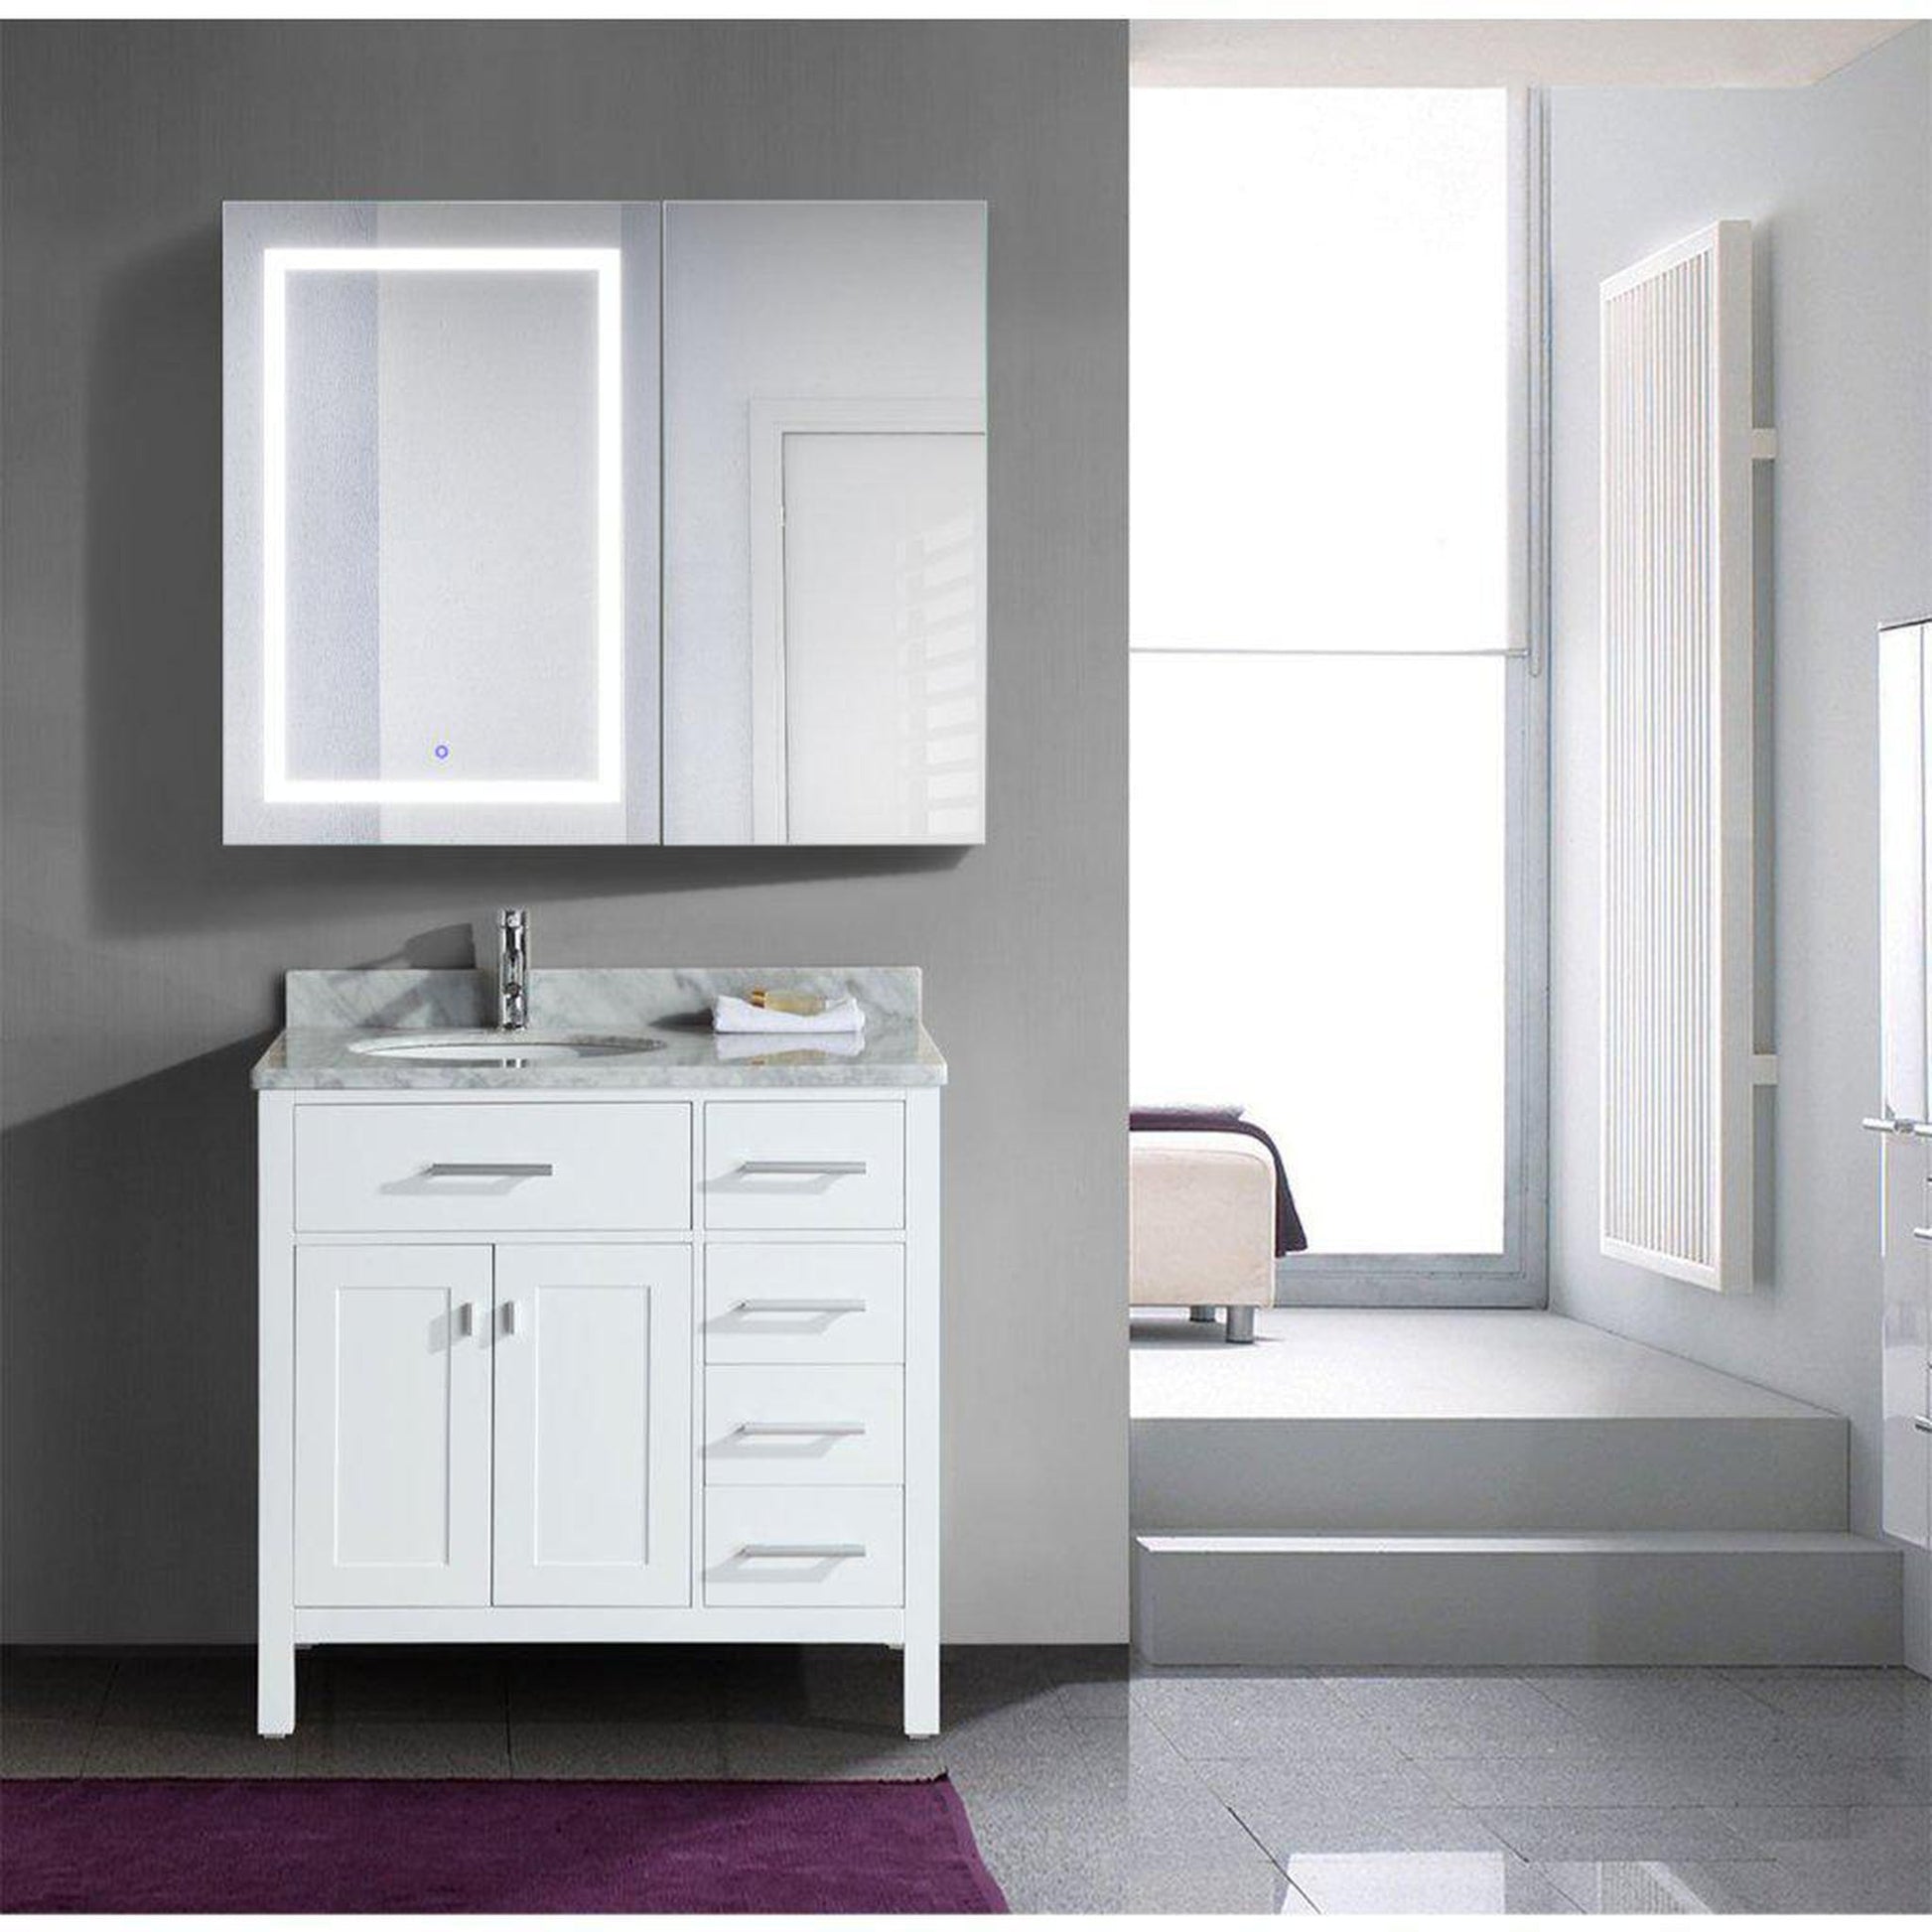 Krugg Reflections Svange 42" x 36" 5000K Single Bi-View Left Opening Recessed/Surface-Mount Illuminated Silver Backed LED Medicine Cabinet Mirror With Built-in Defogger, Dimmer and Electrical Outlet